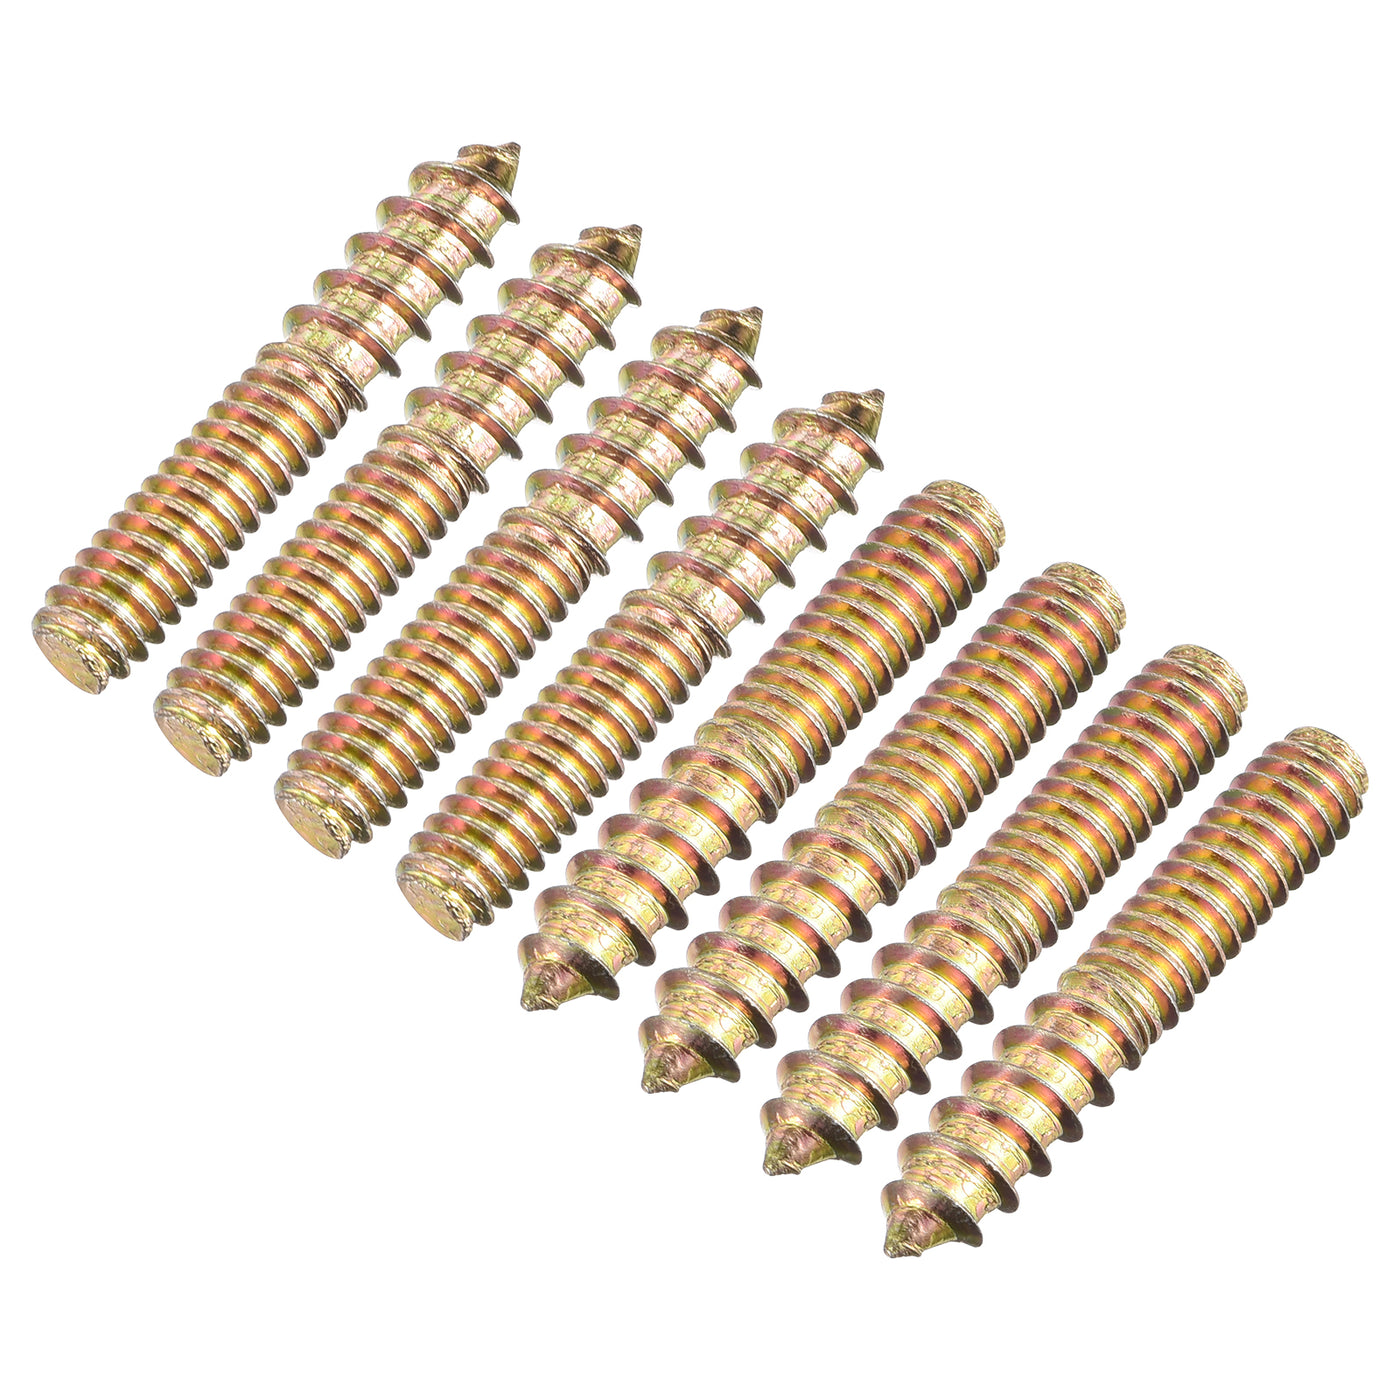 uxcell Uxcell 1/4-20x1-1/2" Hanger Bolts, 12pcs Double Ended Screws Wood Dowel Screws